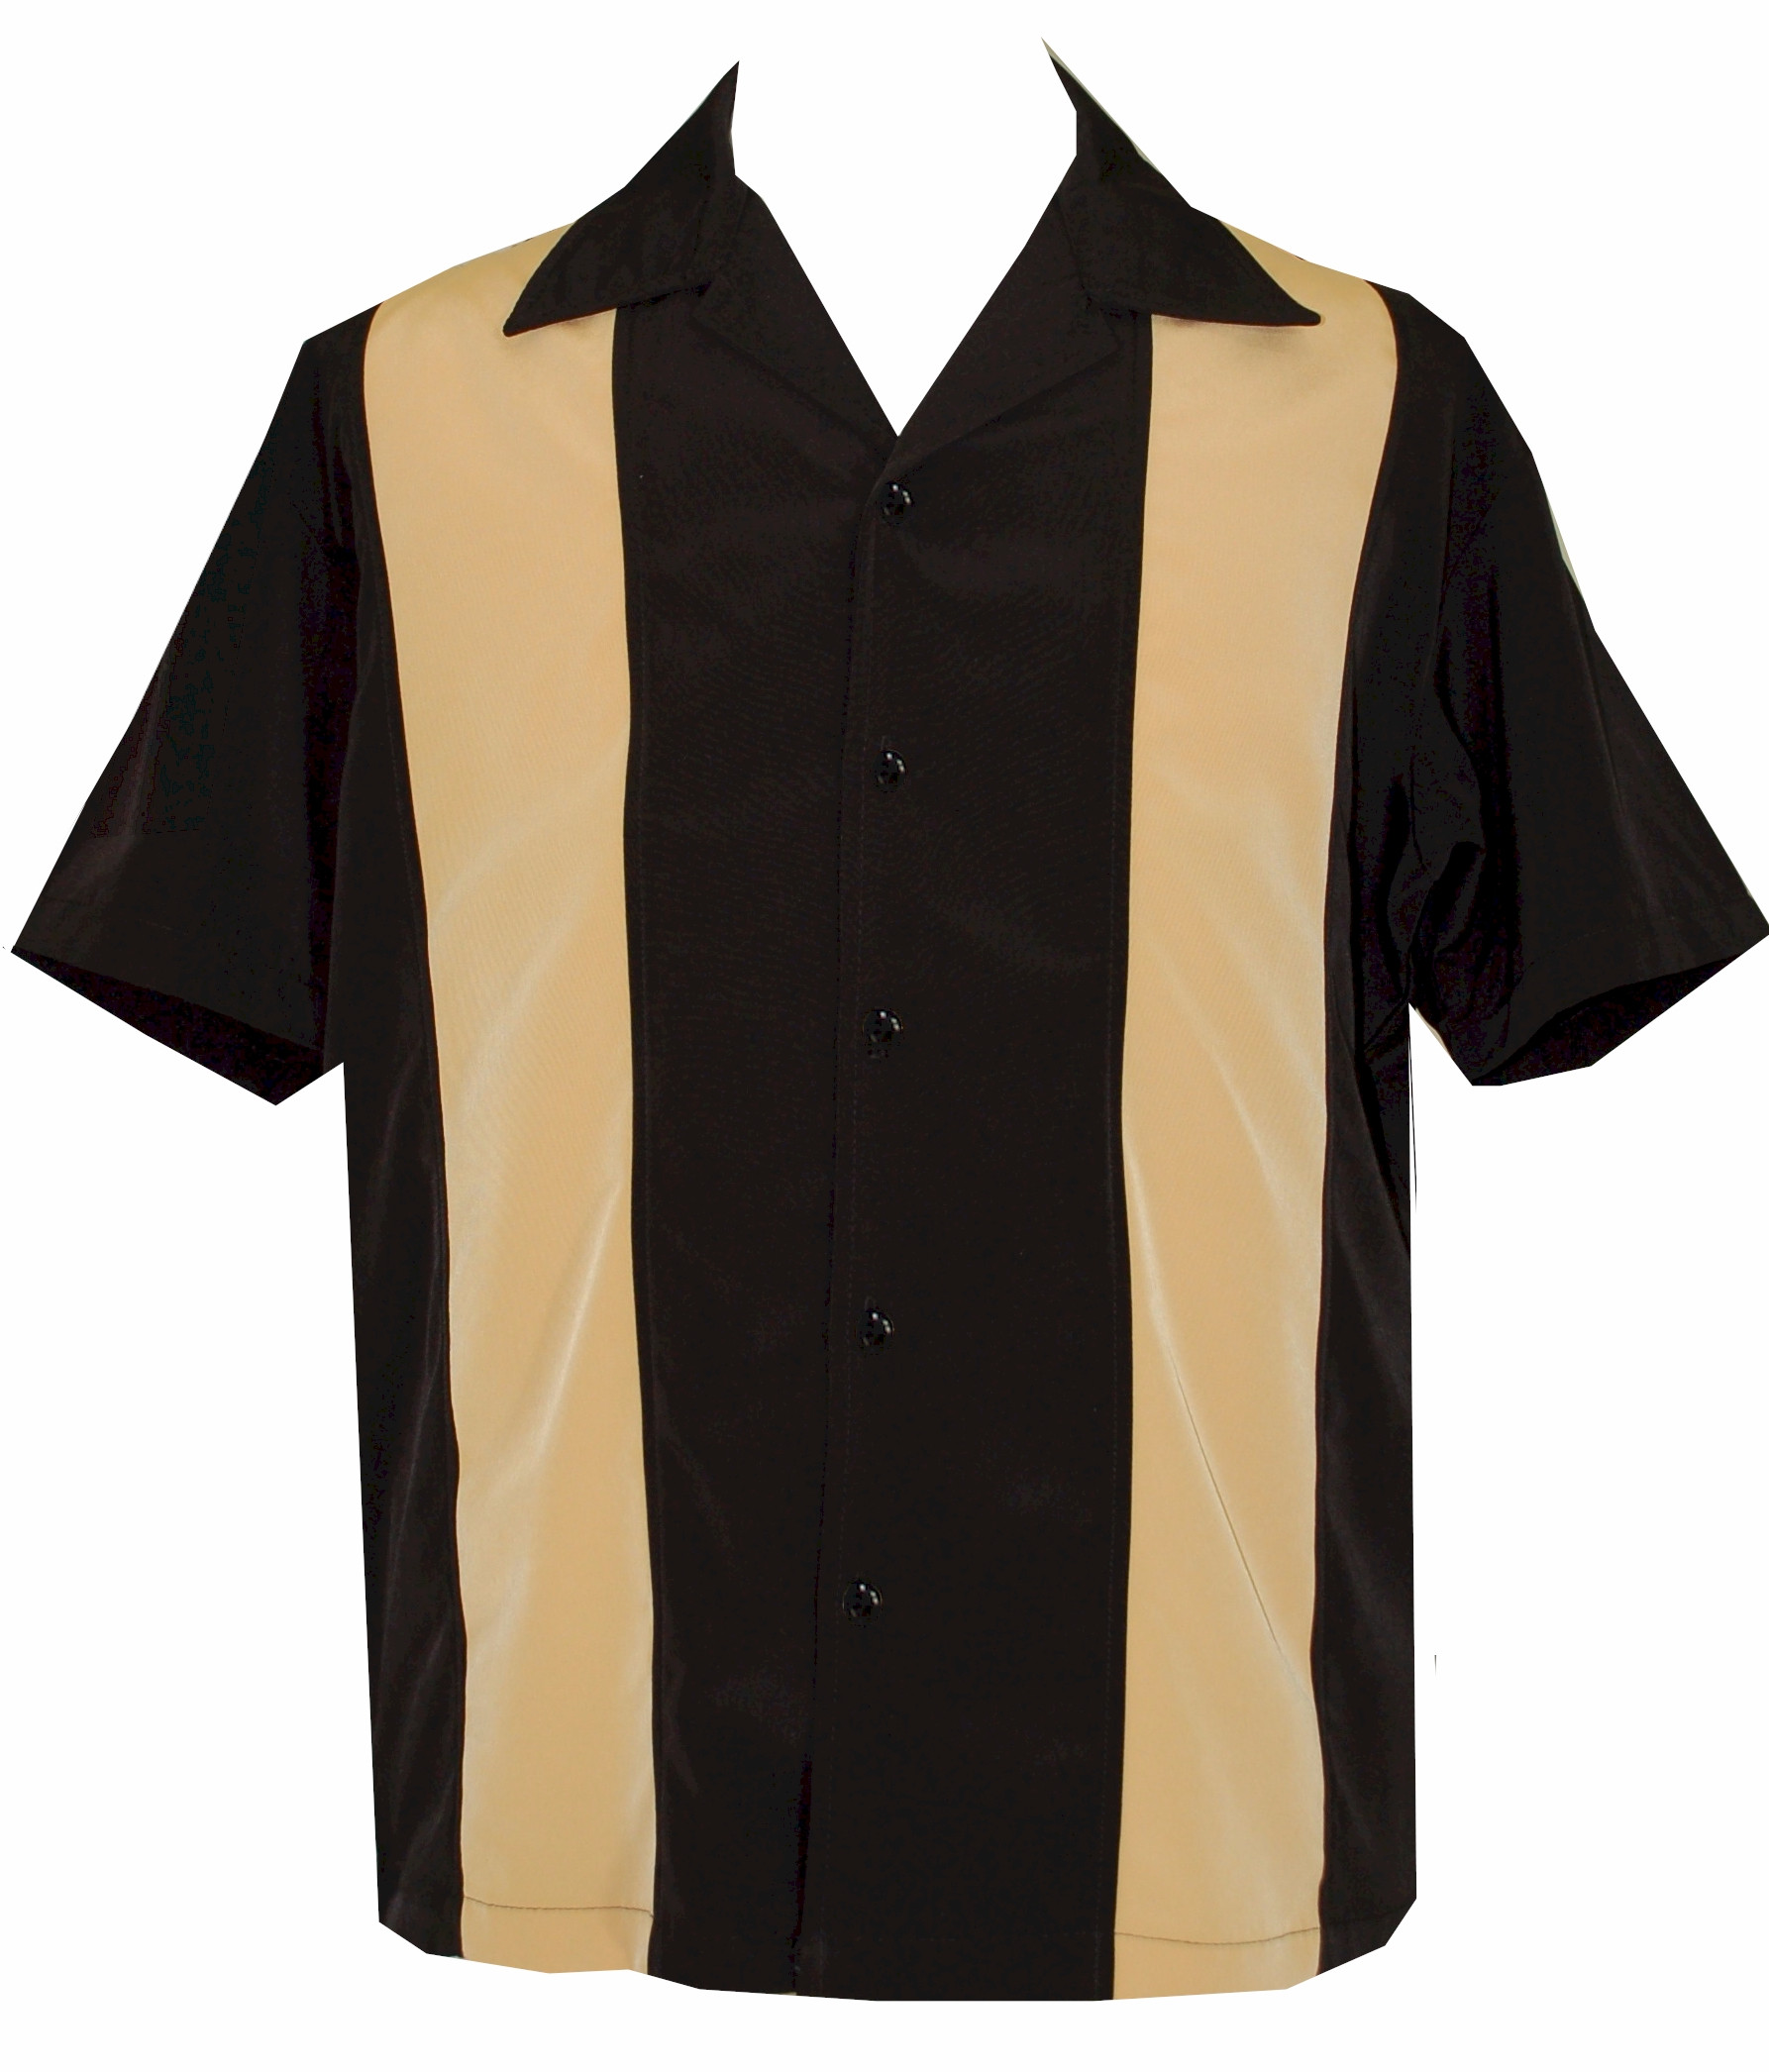 Black and Gold Button Down Shirt | 50s Style Button Up Shirt